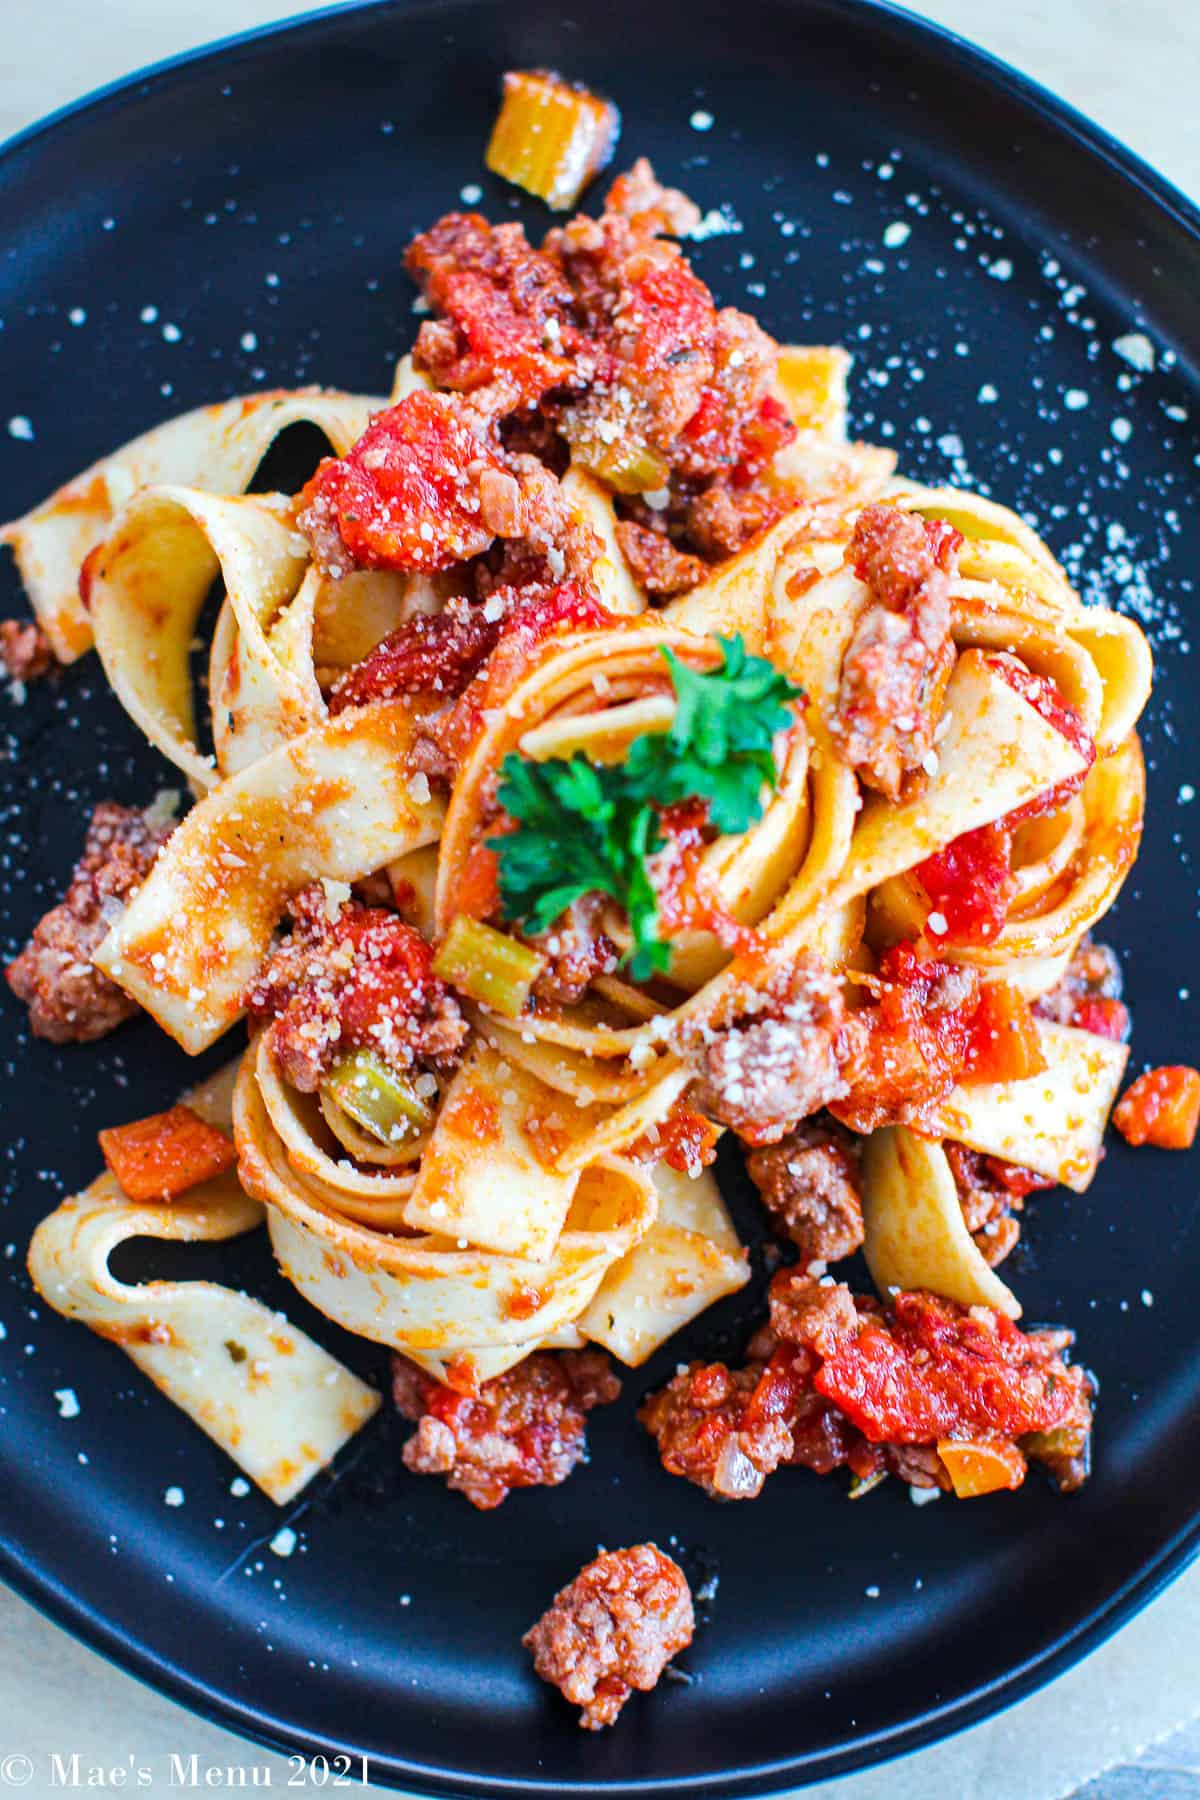 An up-close overhead shot of the bolognese sauce tossed with papparadelle